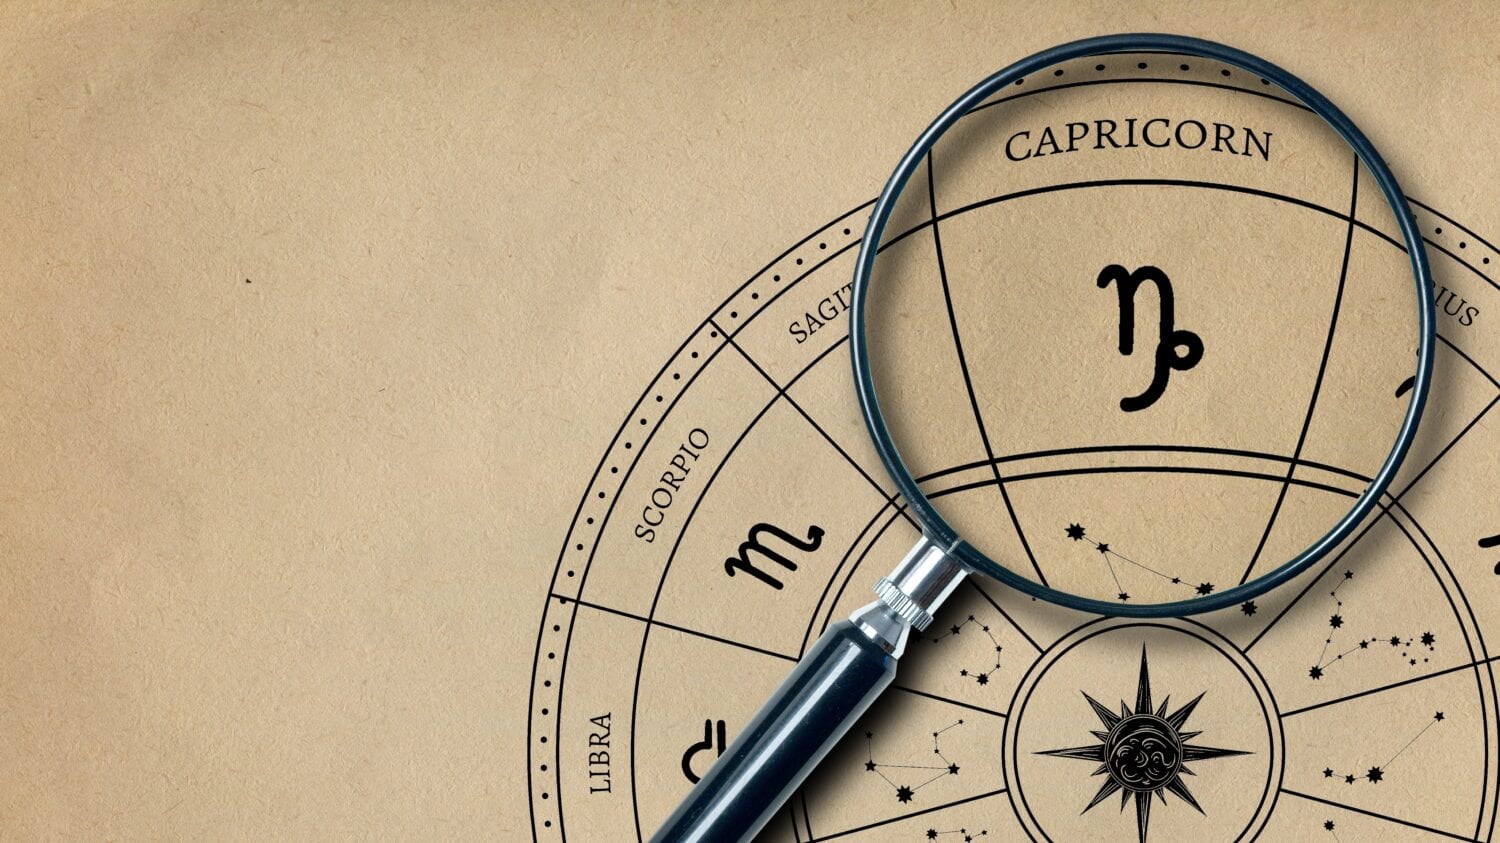 The imprint of the zodiac sign Capricorn on old paper is enlarged with a lens